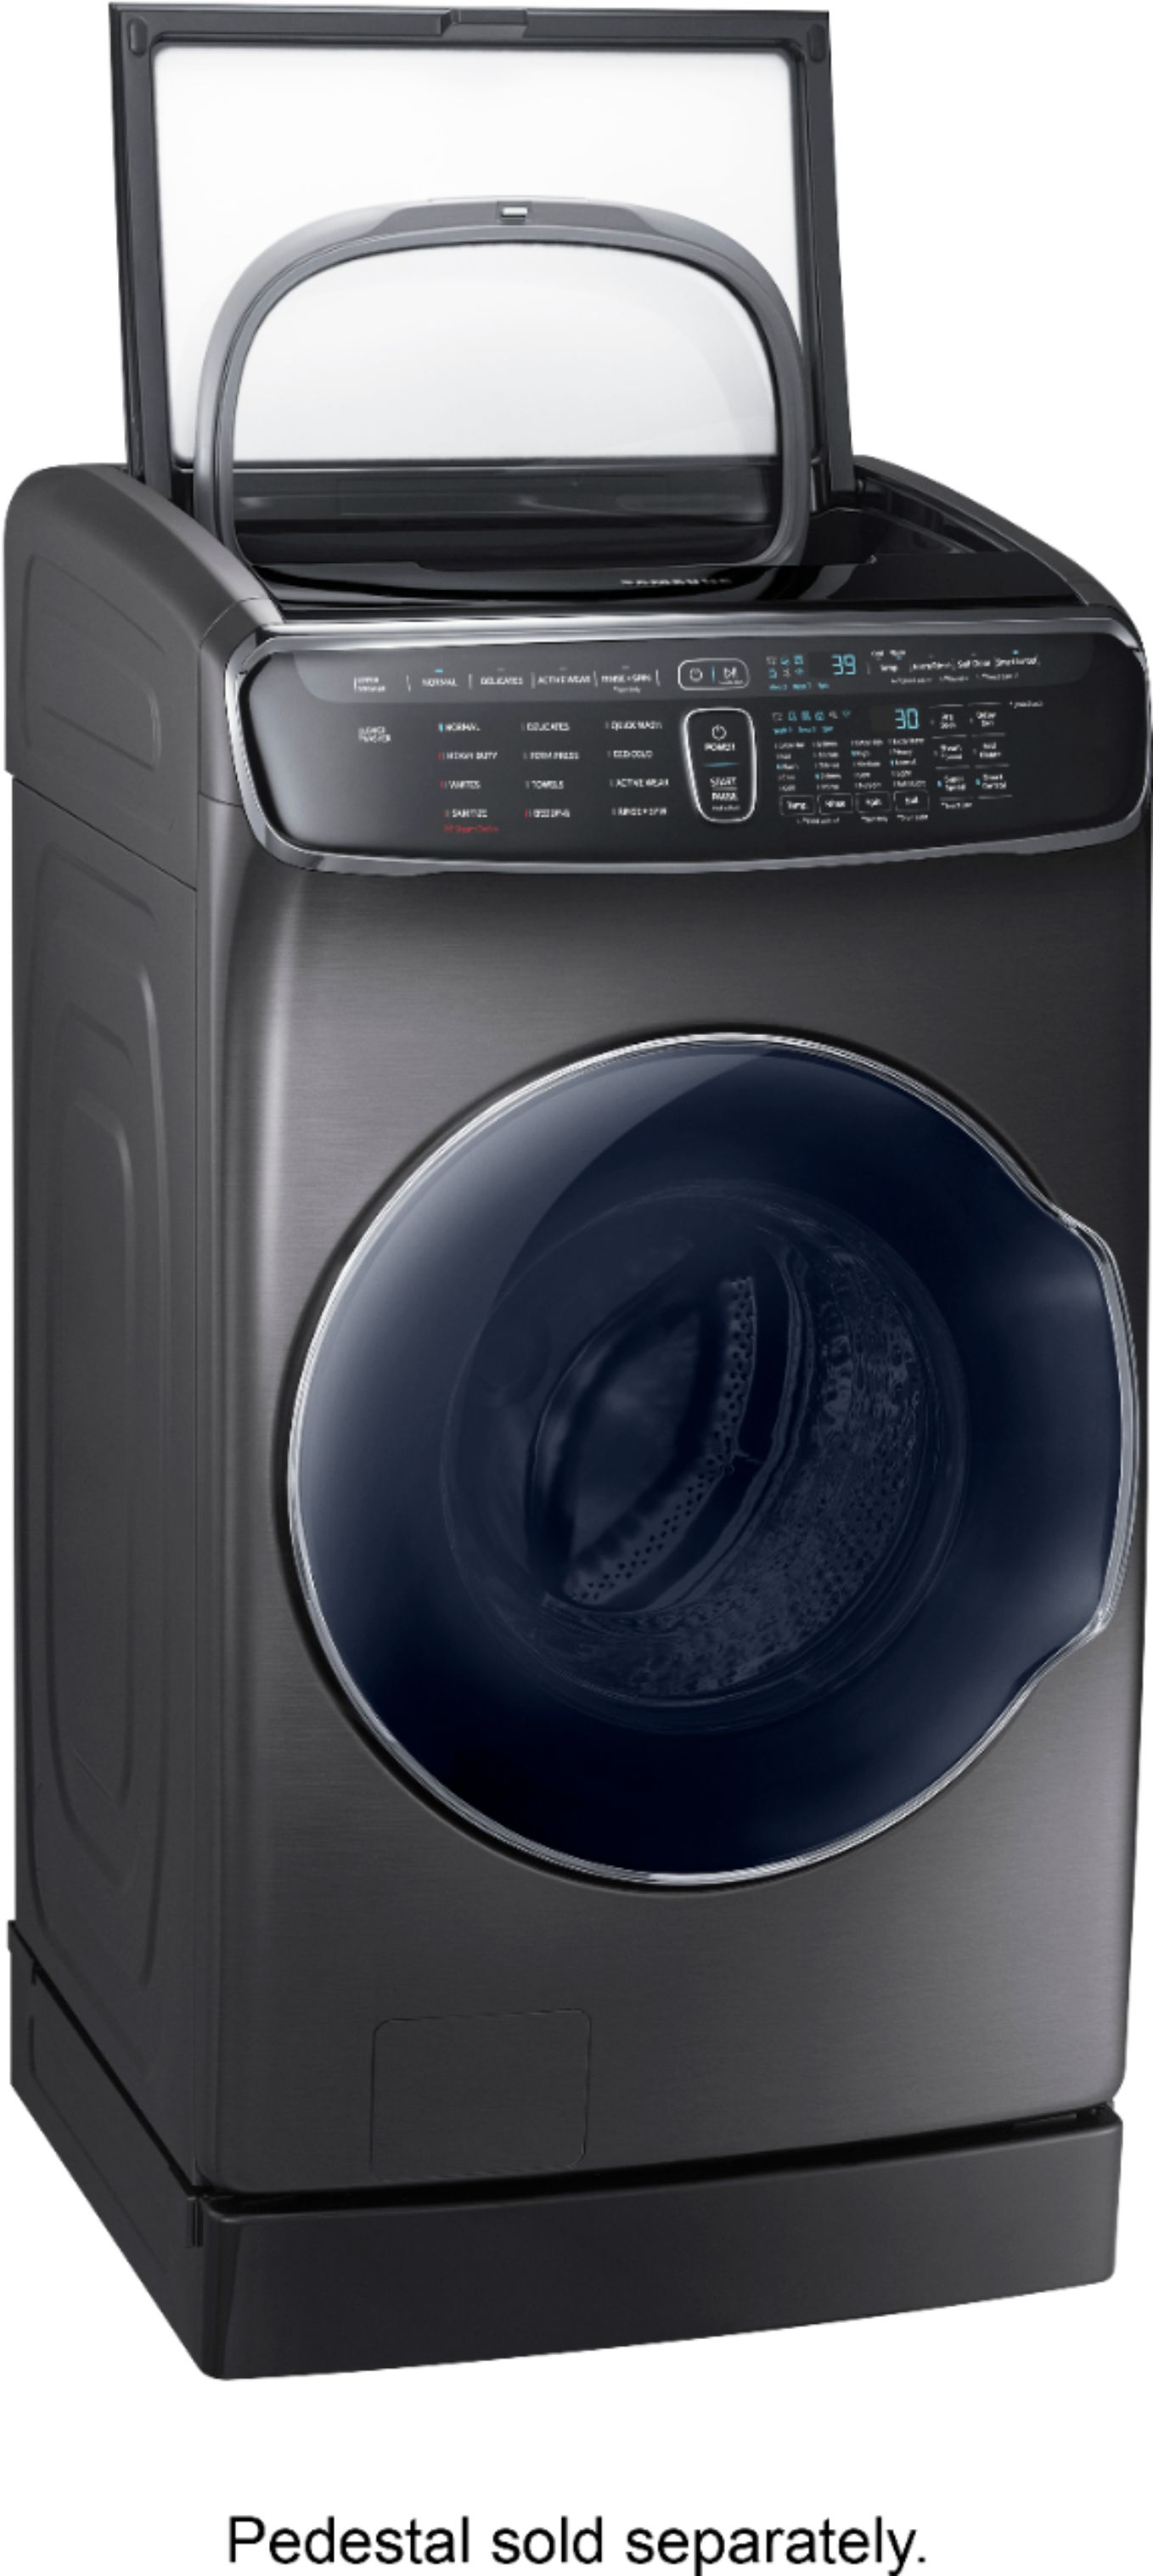 Angle View: Maytag - 5.3 Cu. Ft. High Efficiency Top Load Washer with Deep Clean Option - White